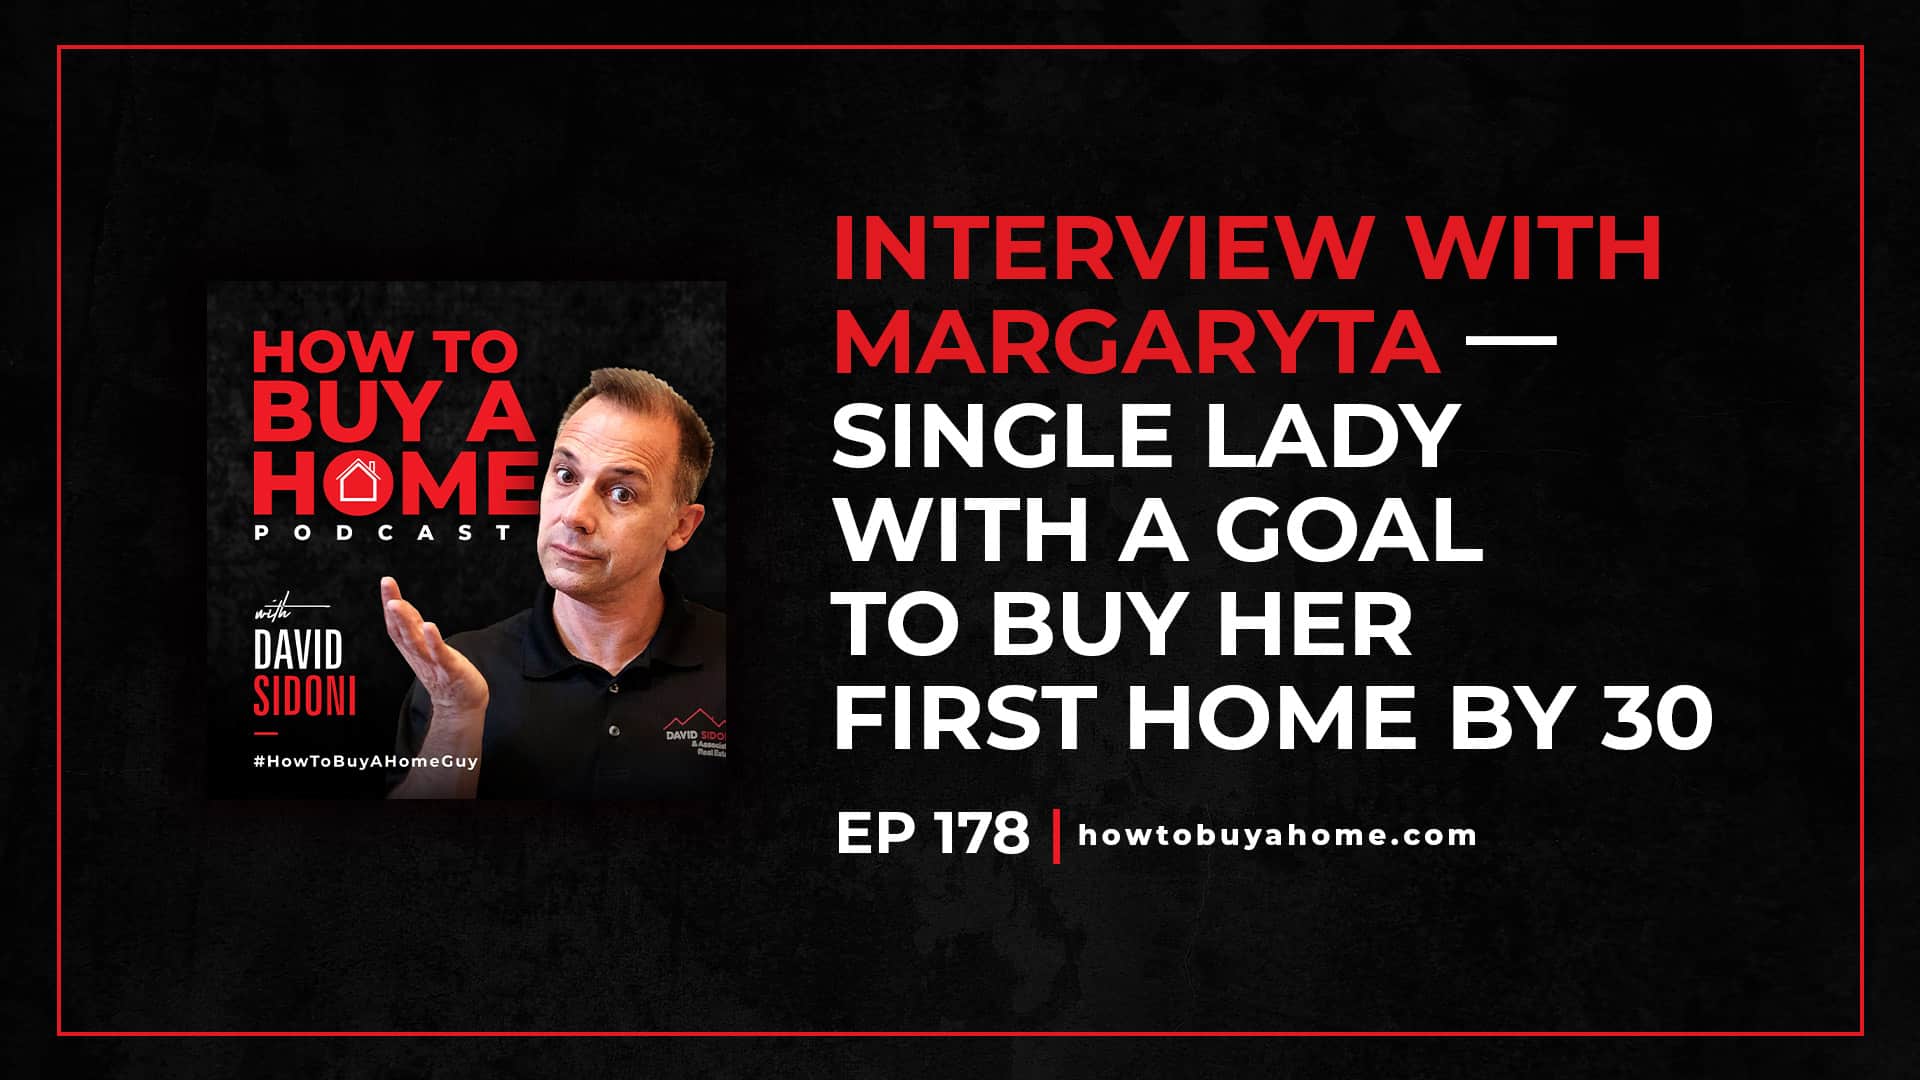 Ep. 178 – Interview with Margaryta – Single lady with a goal to buy her first home by 30